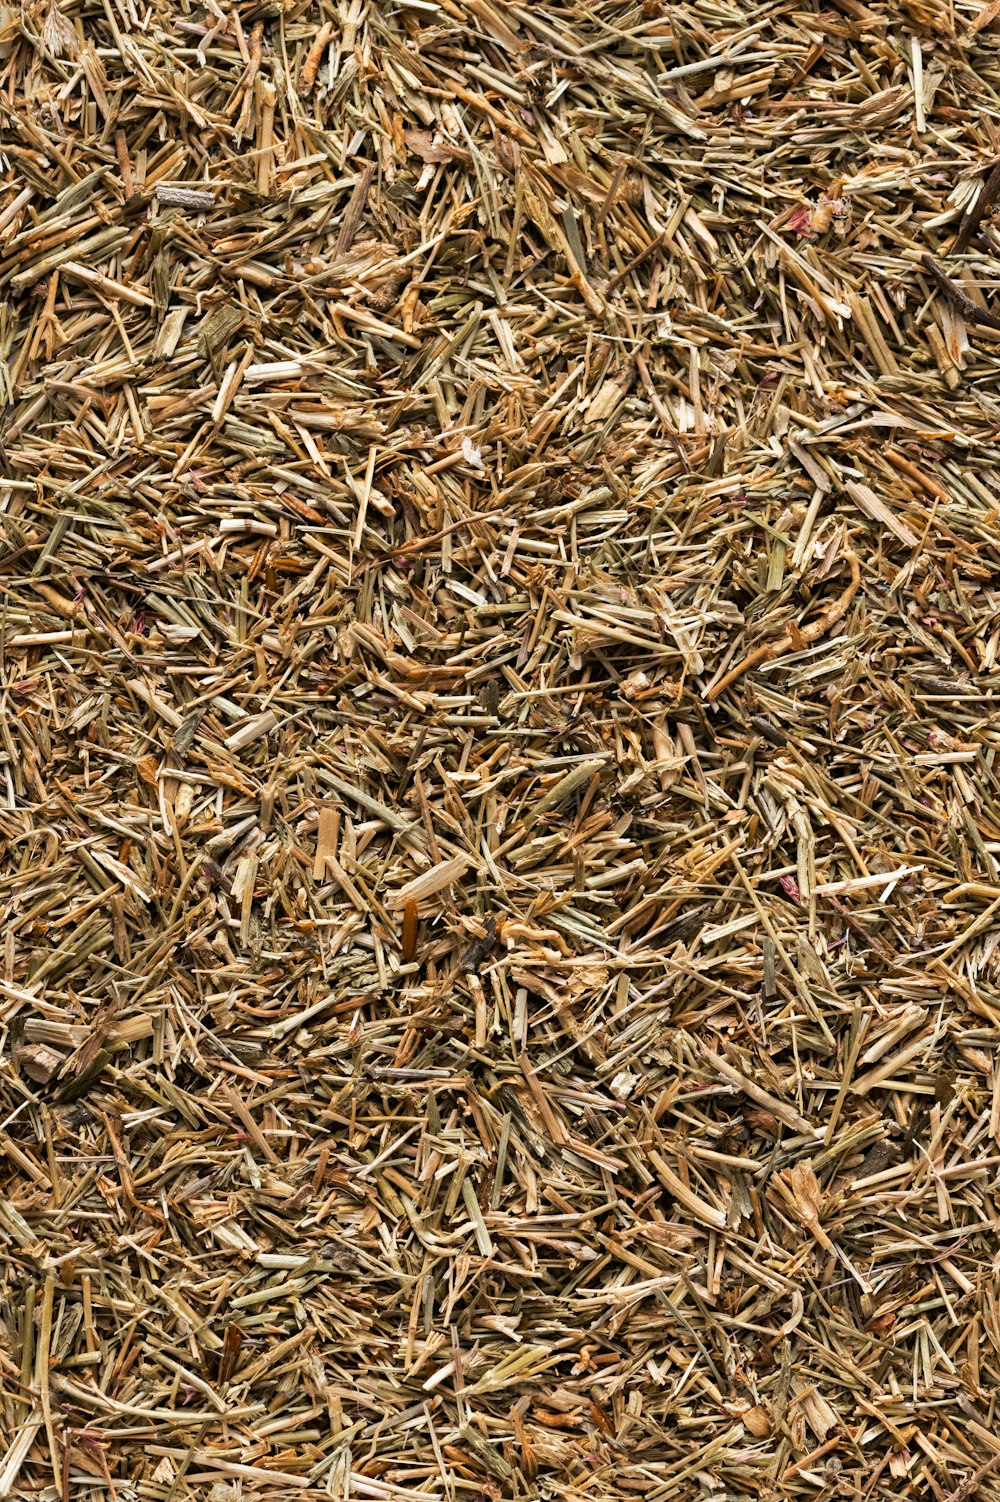 a close up of a pile of dry grass